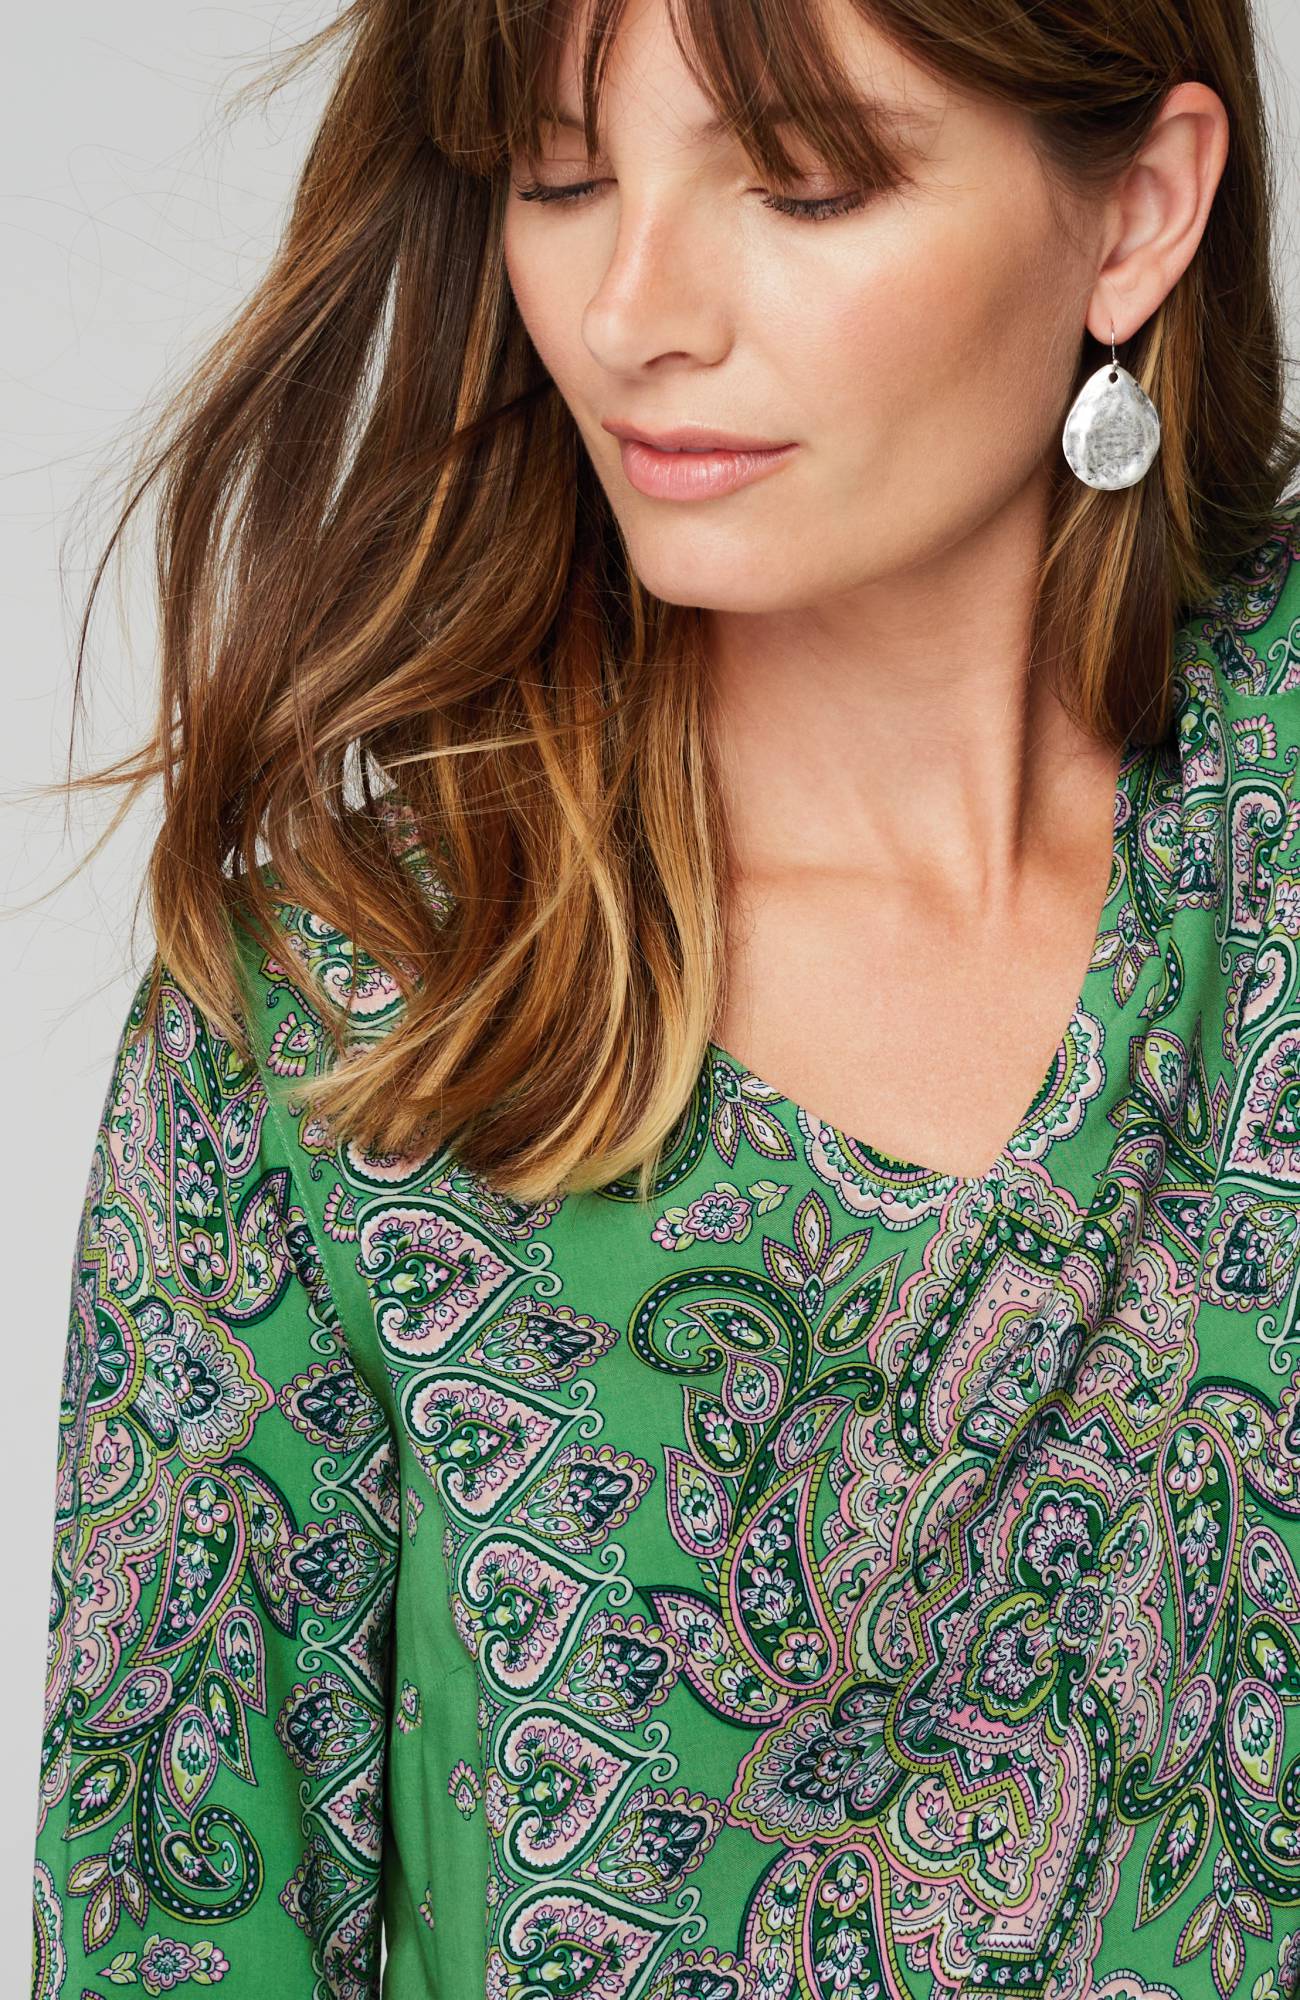 Placed-Paisley Top